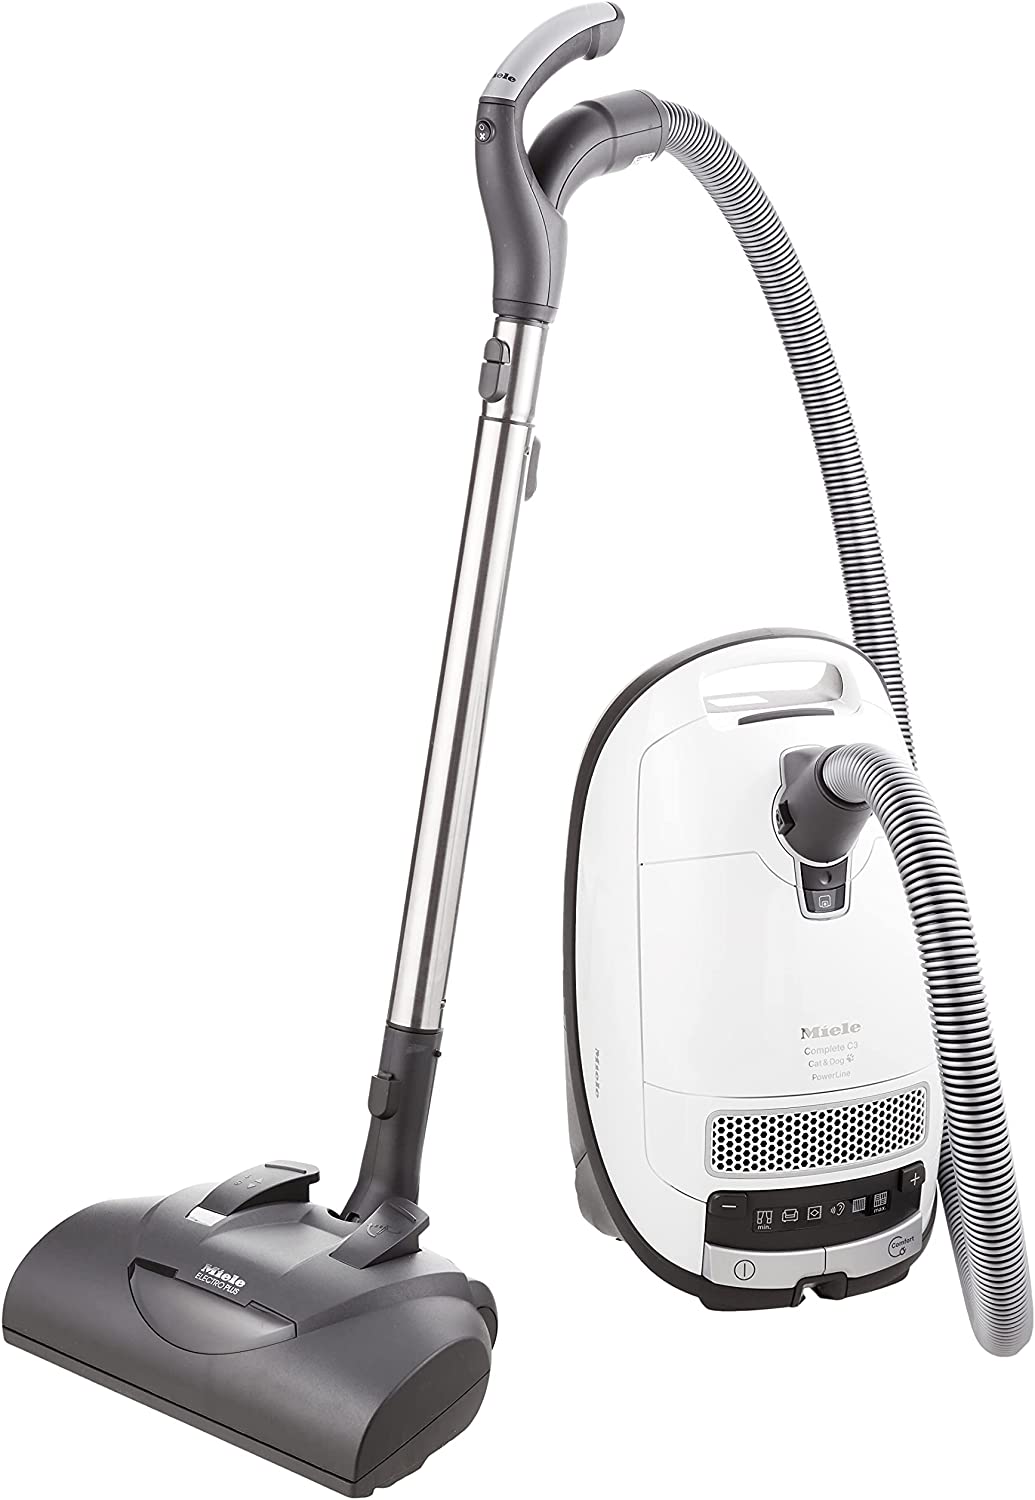 Miele Complete C3 6-Stage Footswitch Pet Vacuum